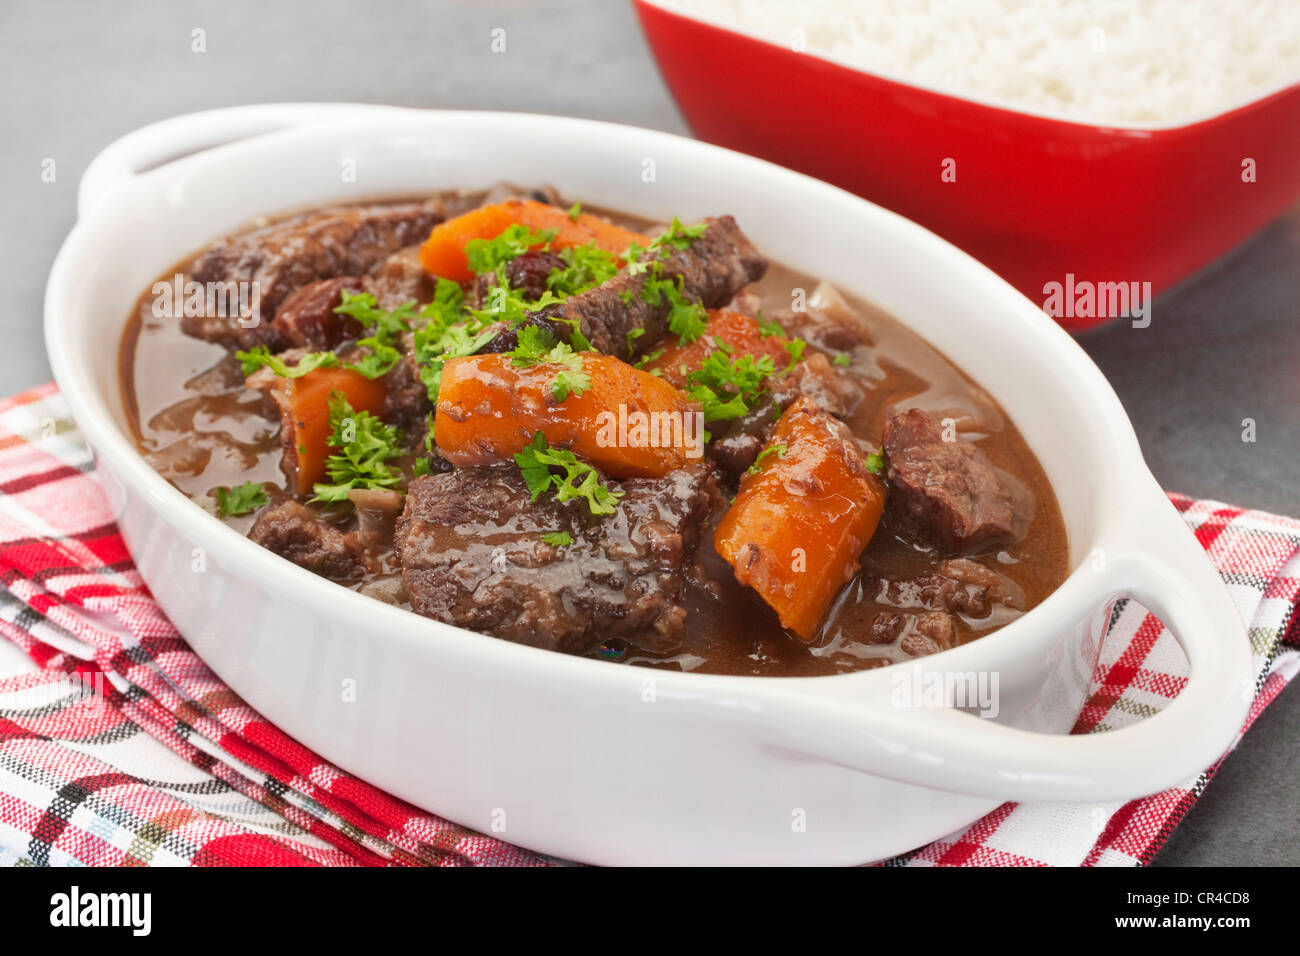 A French stew, daube of beef Provencal has a delicious sauce made from red wine, stock, cinnamon, cloves, orange and herbs Stock Photo